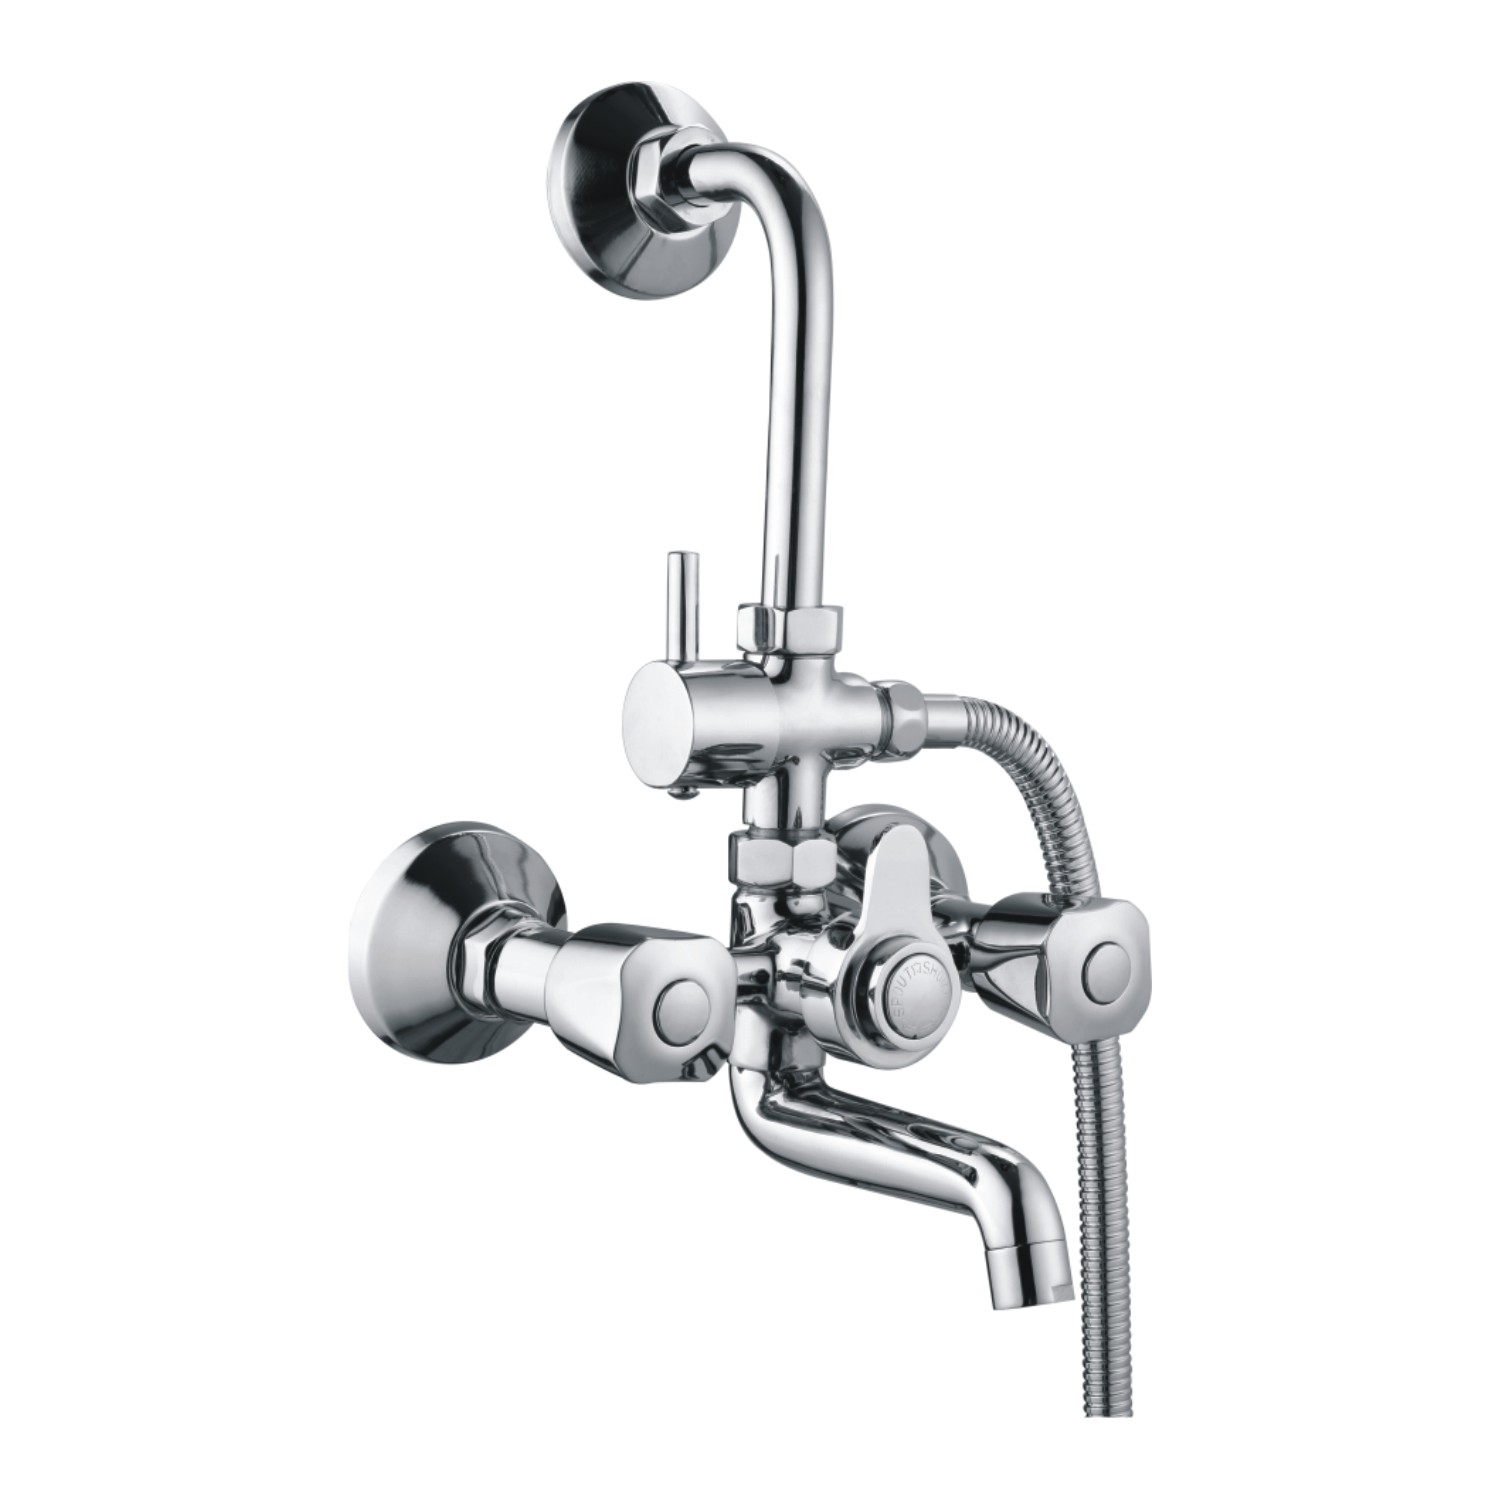 C.P WALL MIXER 3 IN 1 SYSTEM WITH  BLEND SET TELE. SHOWER & 1.5 MTR TUBE WITH STAND 